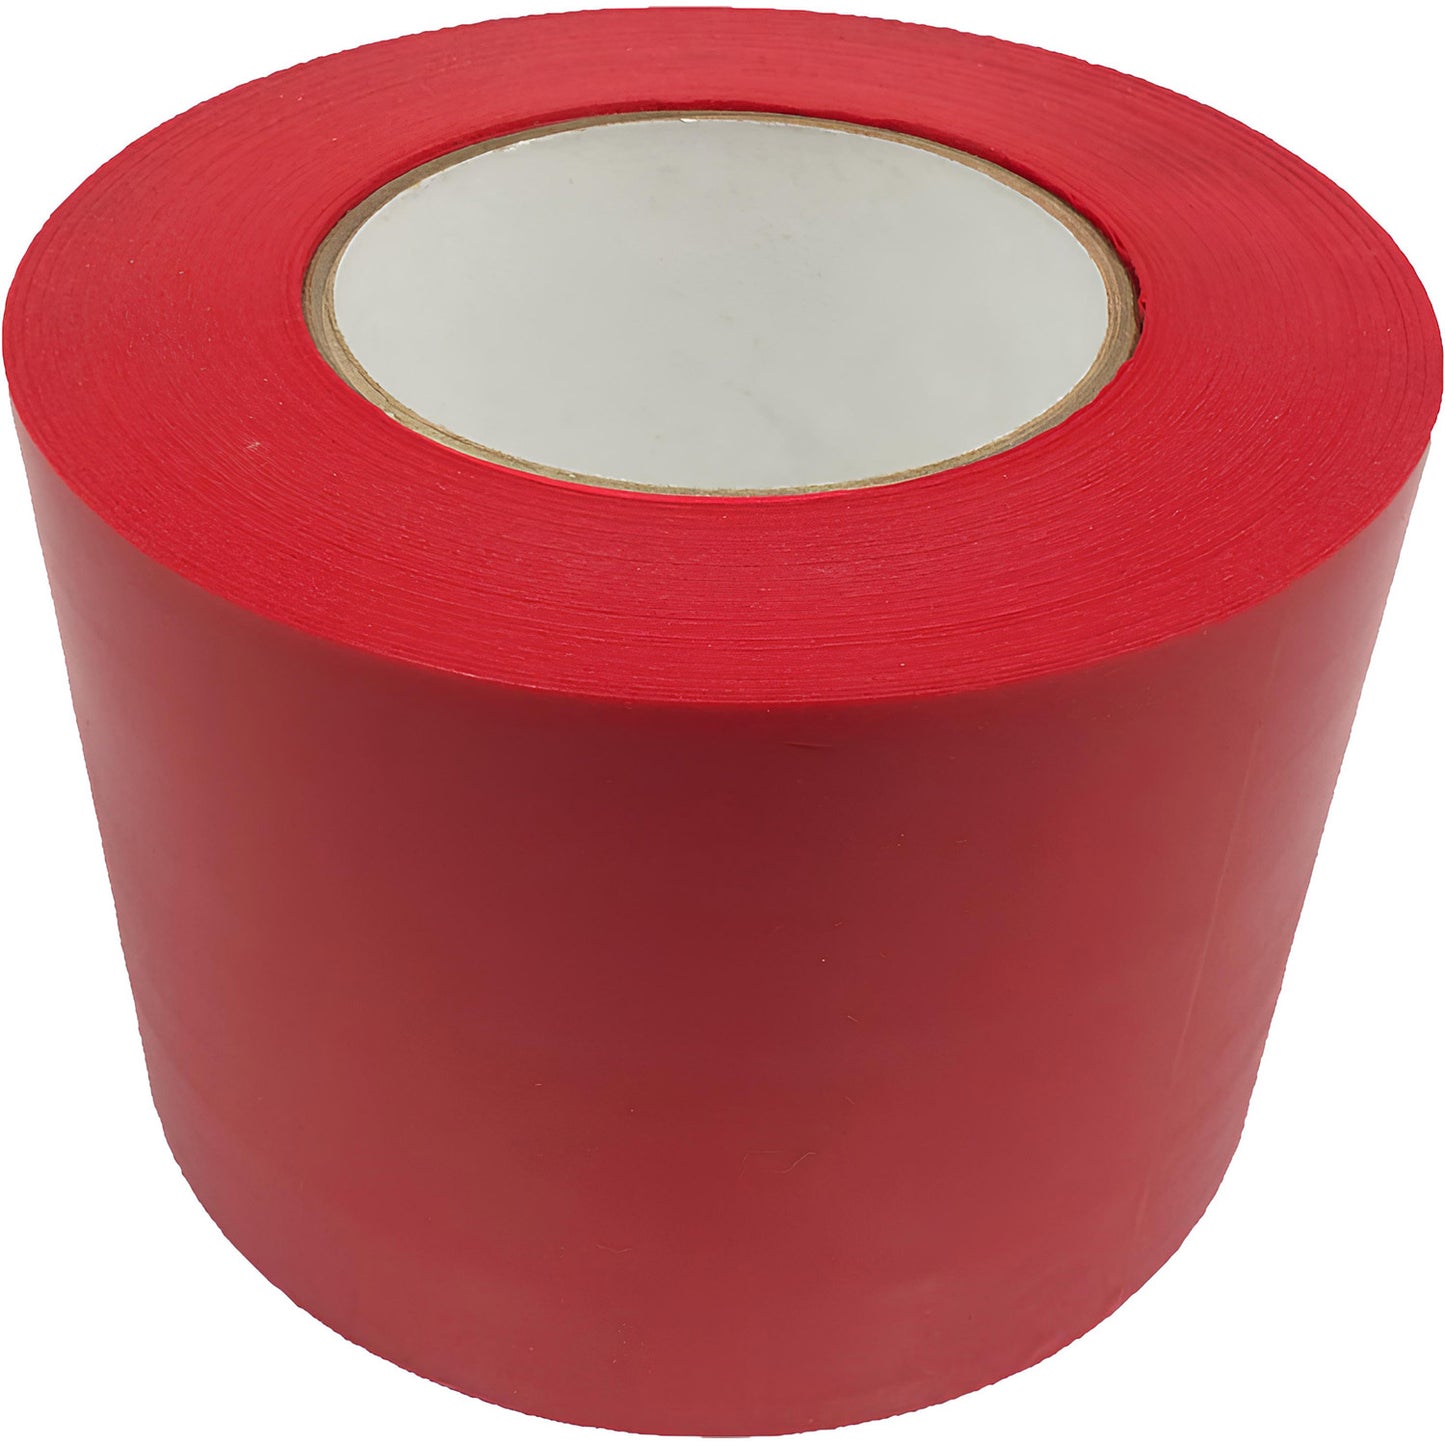 Top view of red seam tape